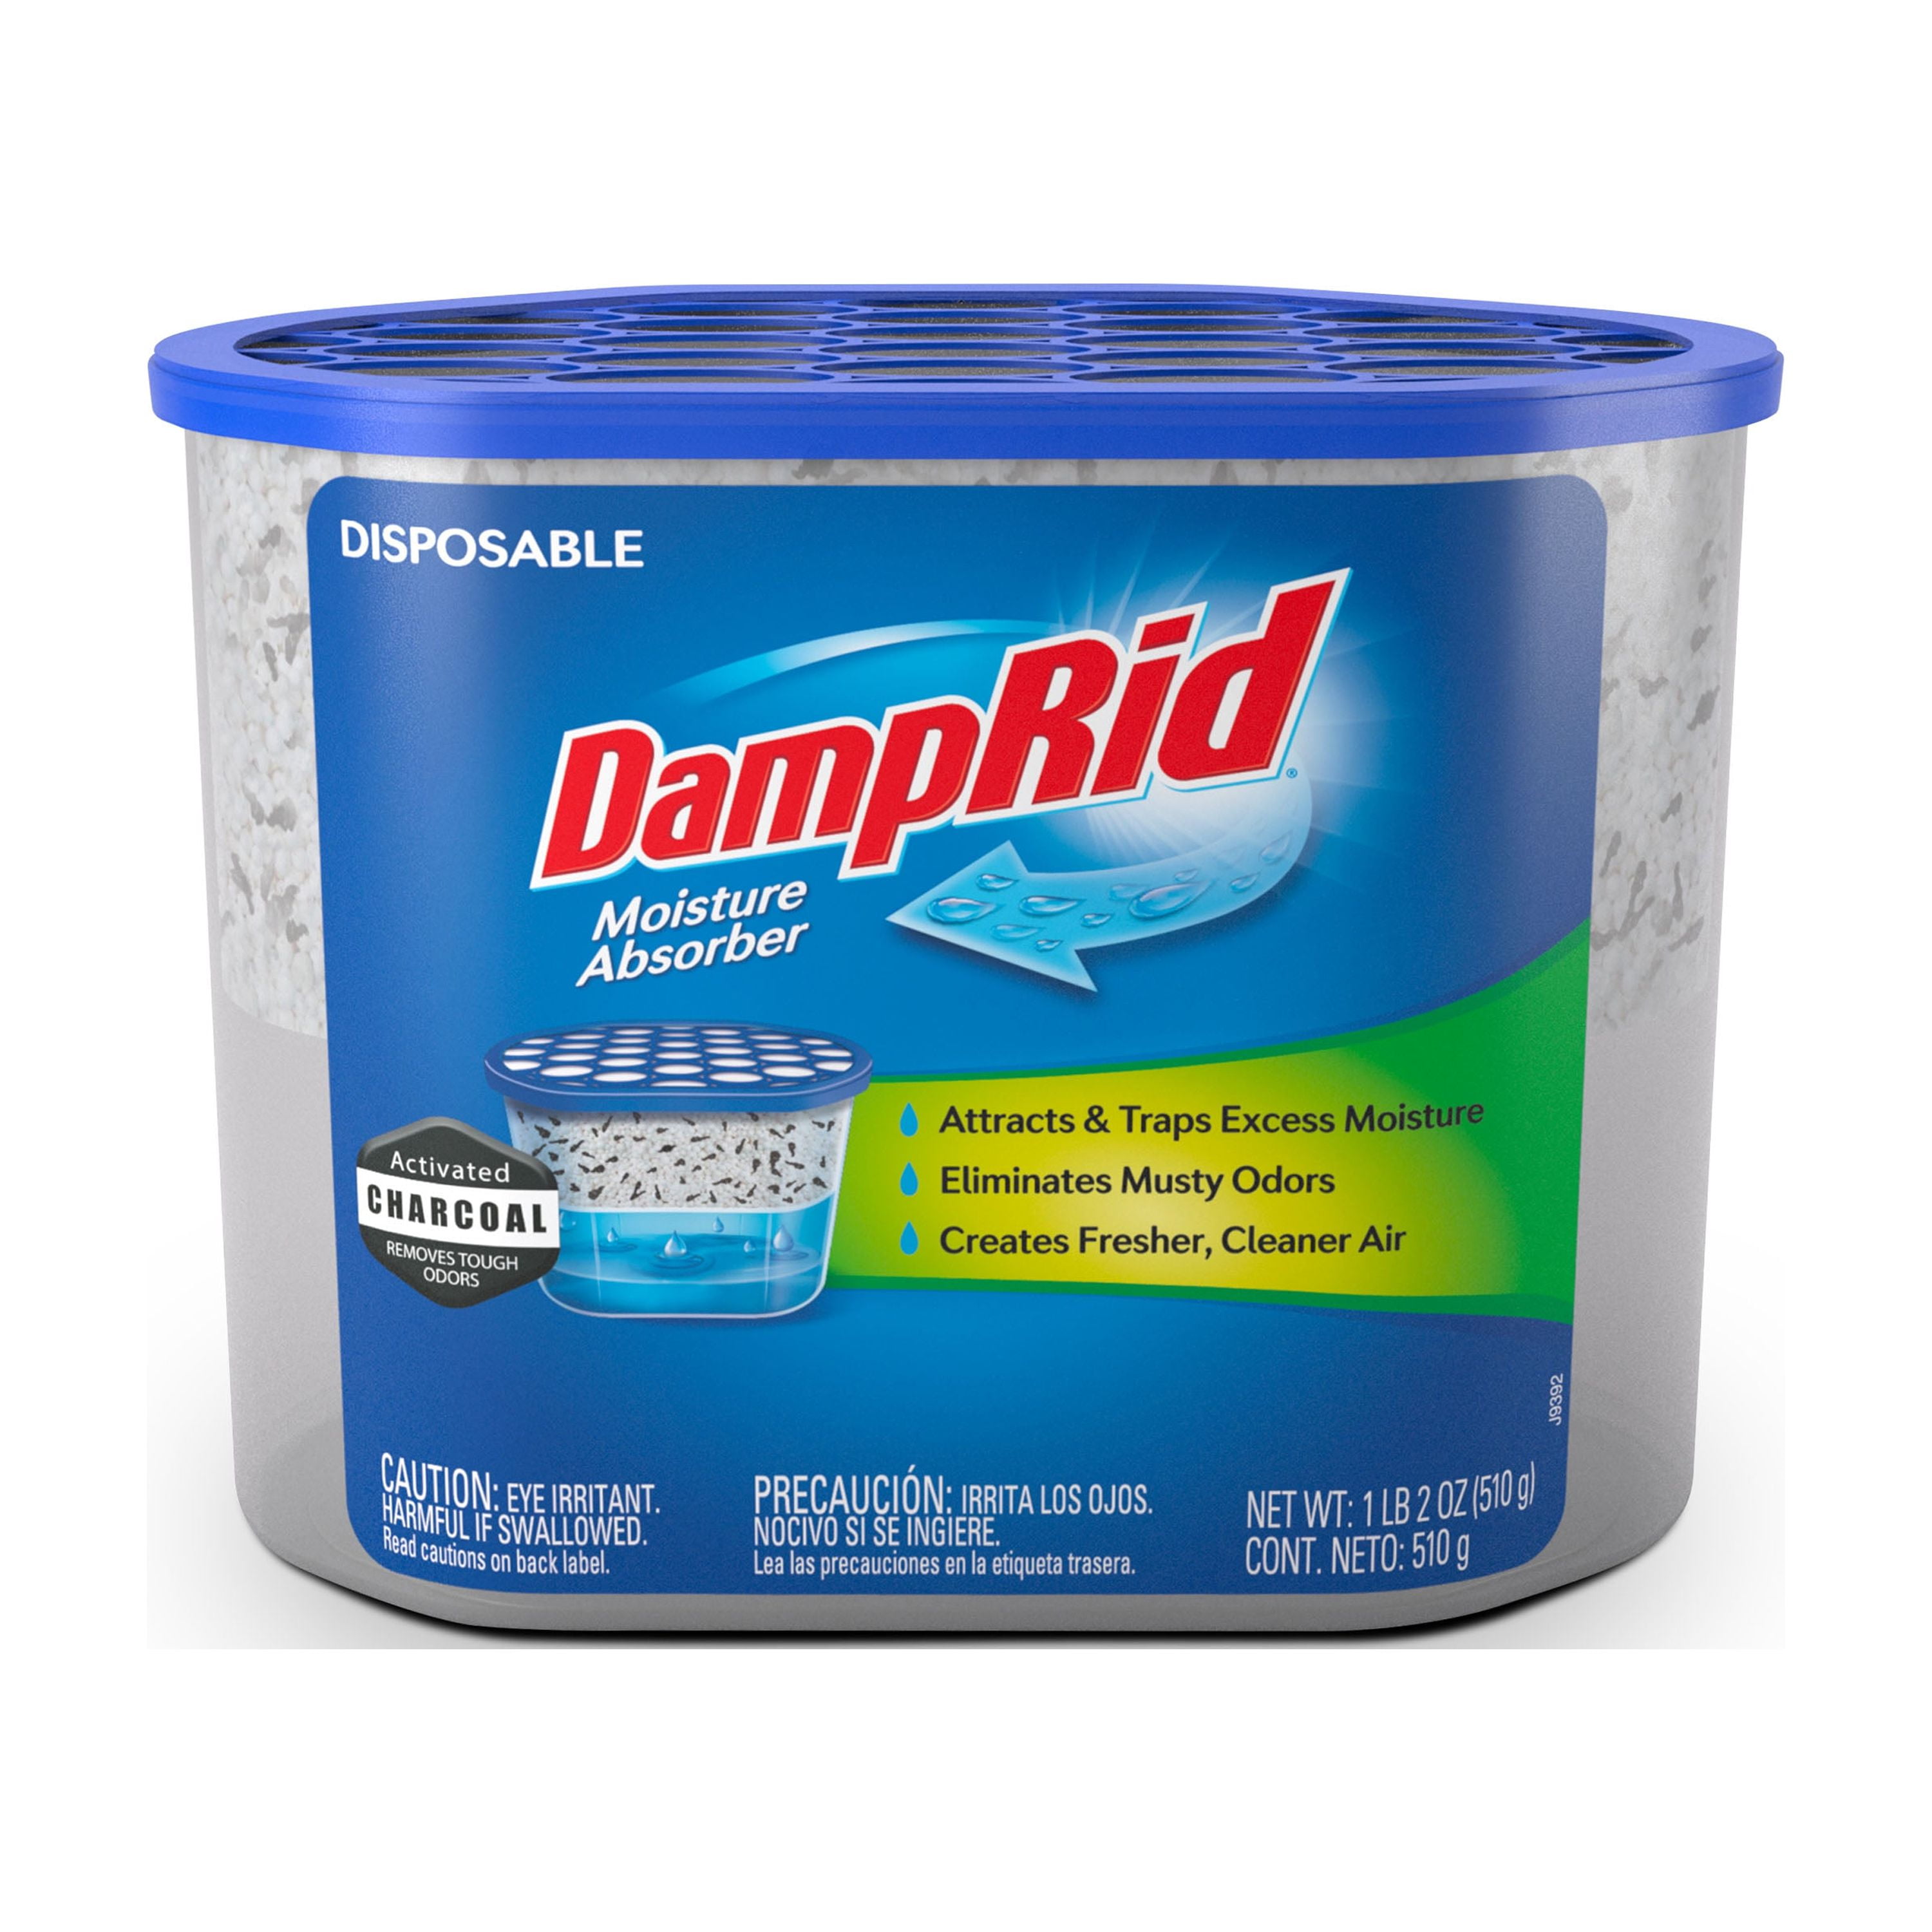 DampRid Fragrance Free Disposable Moisture Absorber for Boats and RVs with  Activated Charcoal – 18 oz.; Odor Absorber & Remover